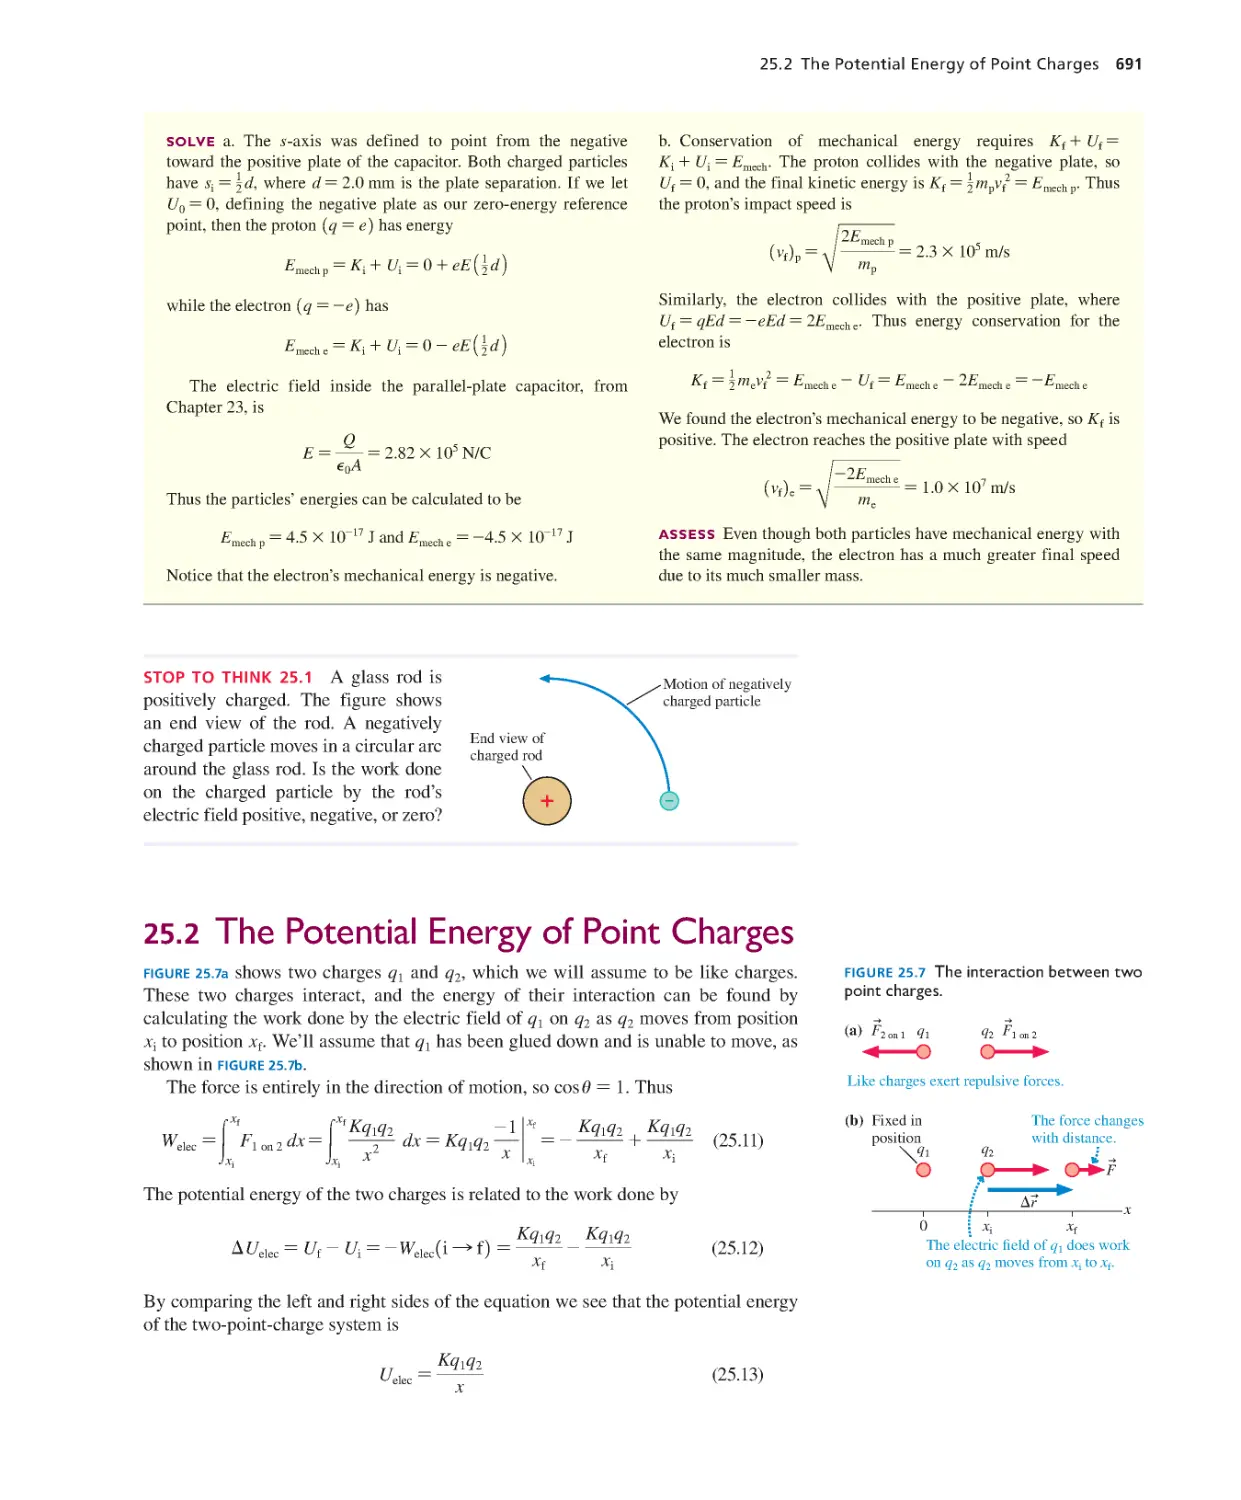 25.2. The Potential Energy of Point Charges